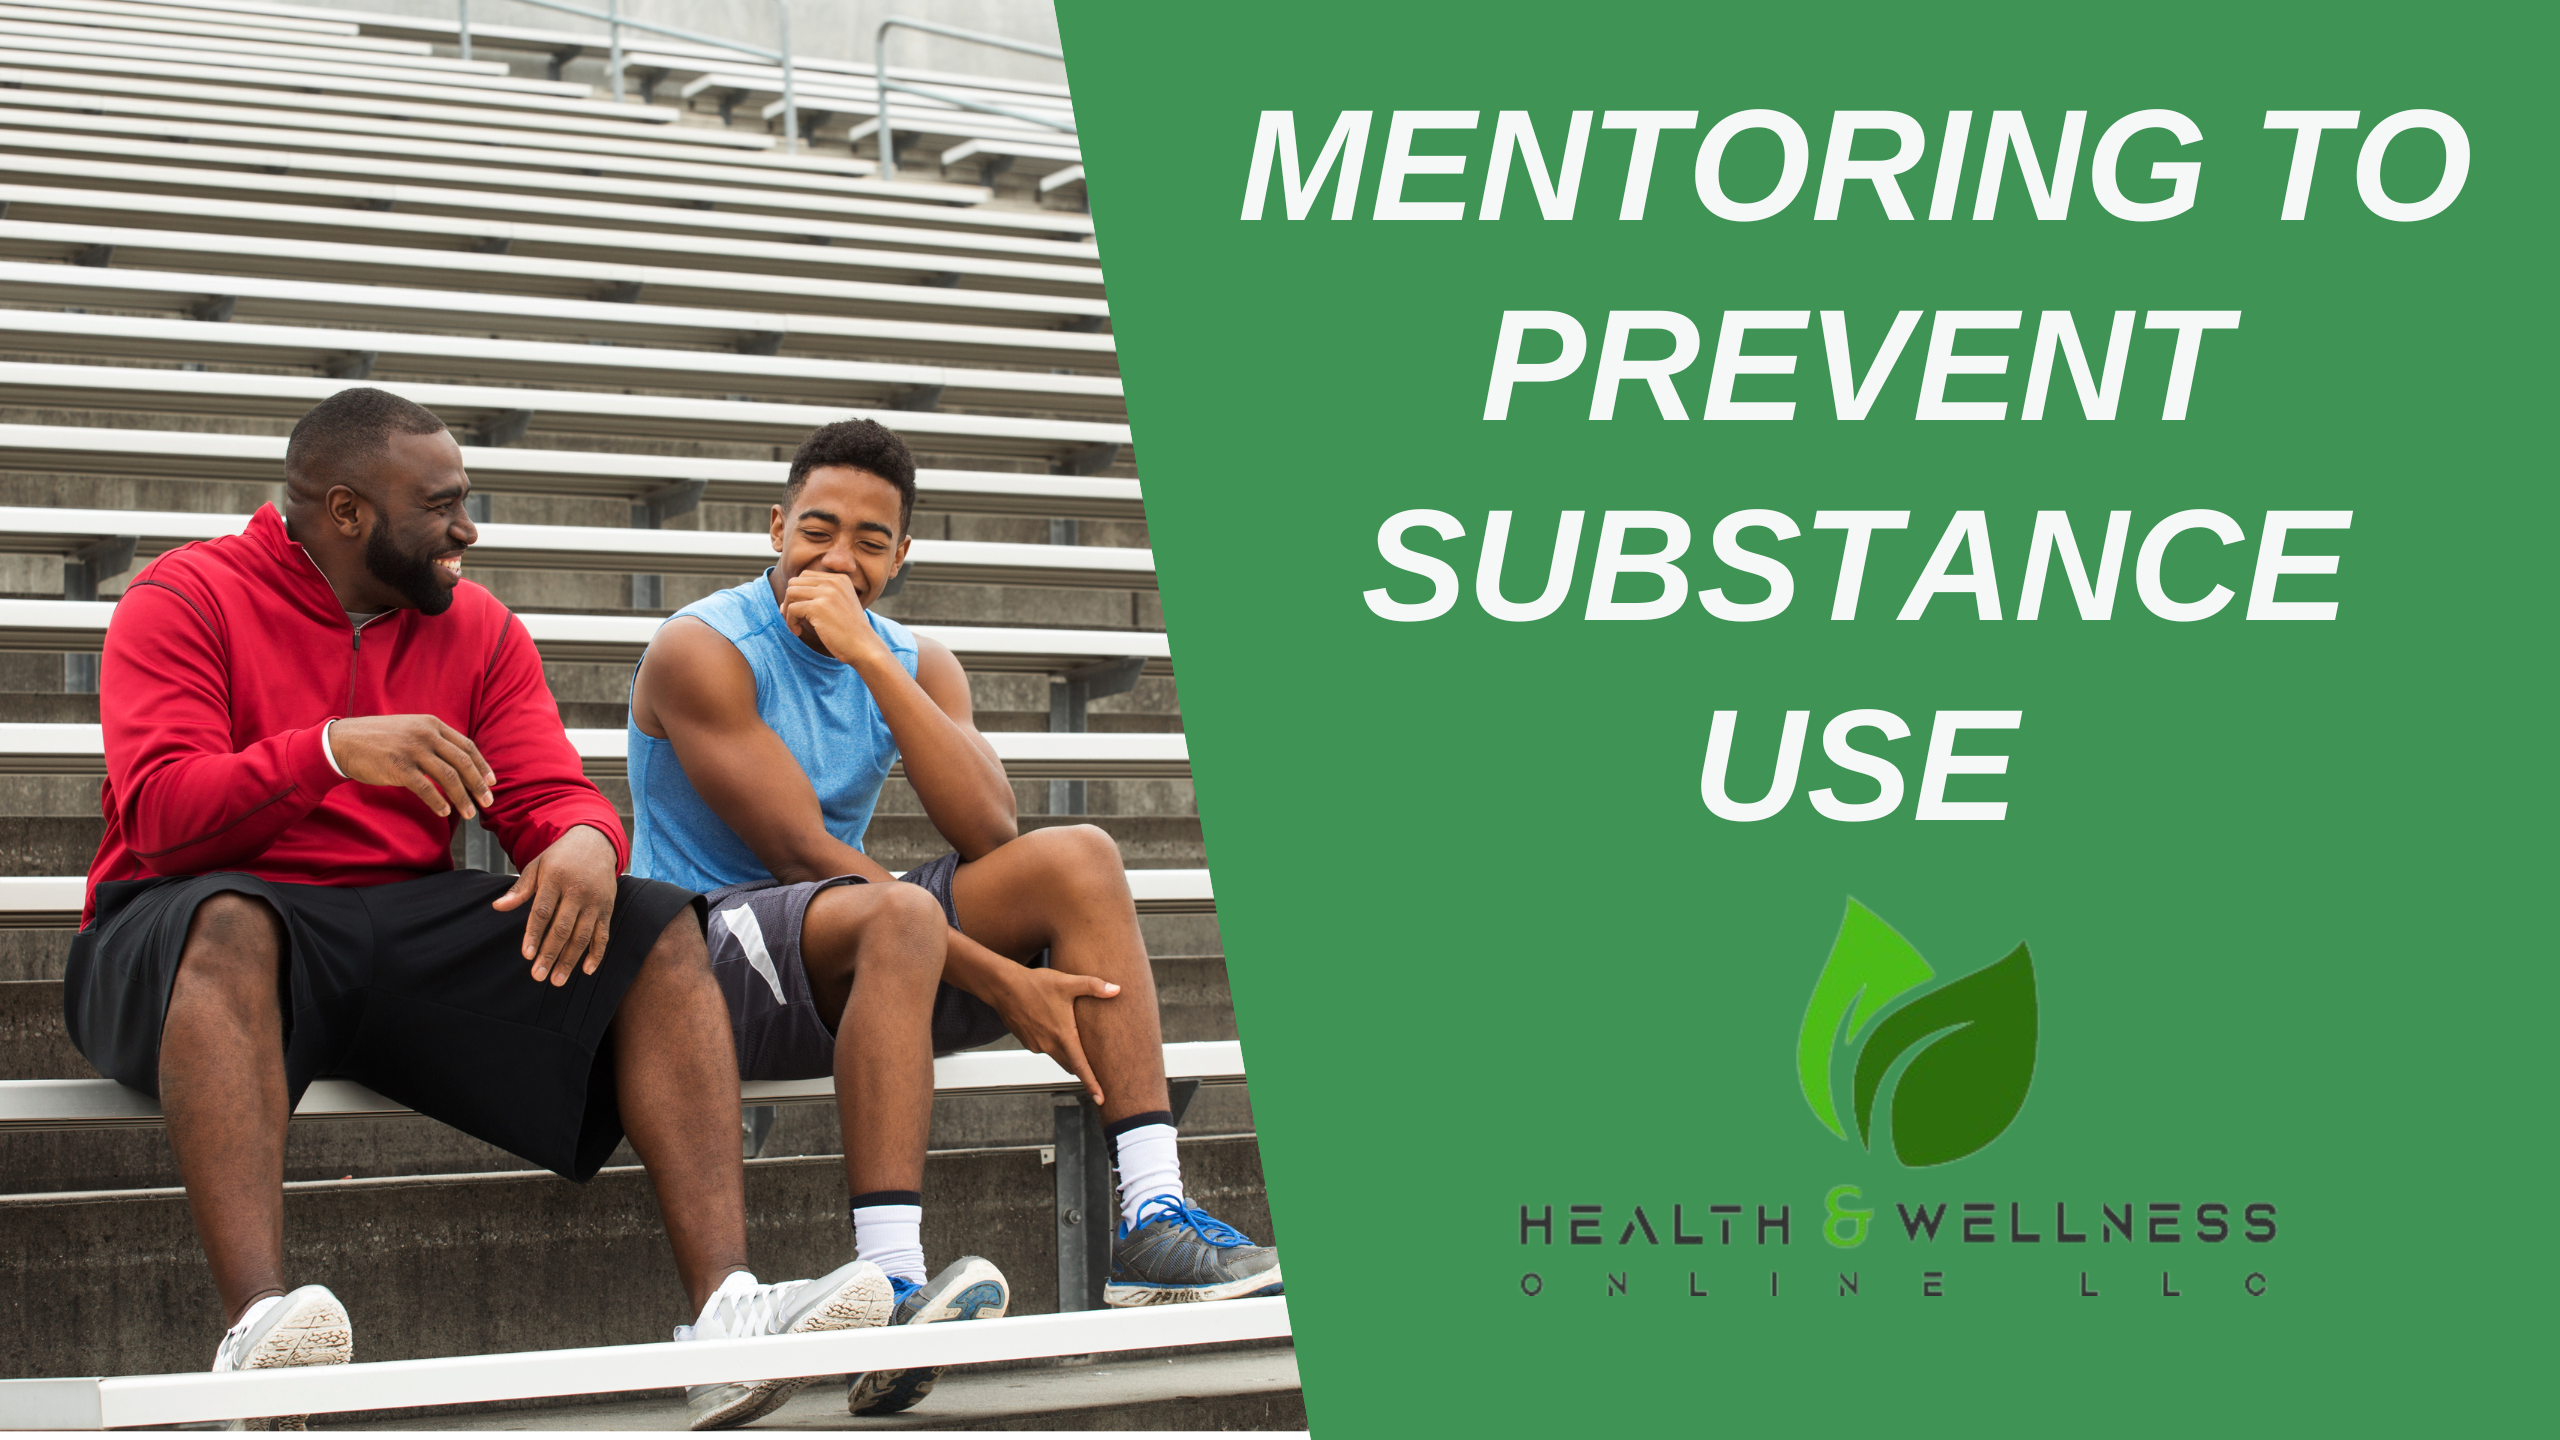 Mentoring to Prevent Substance Use is a 5.5 CE Credit Hours course by Dr. Donna Poppendieck from Health and Wellness Online.